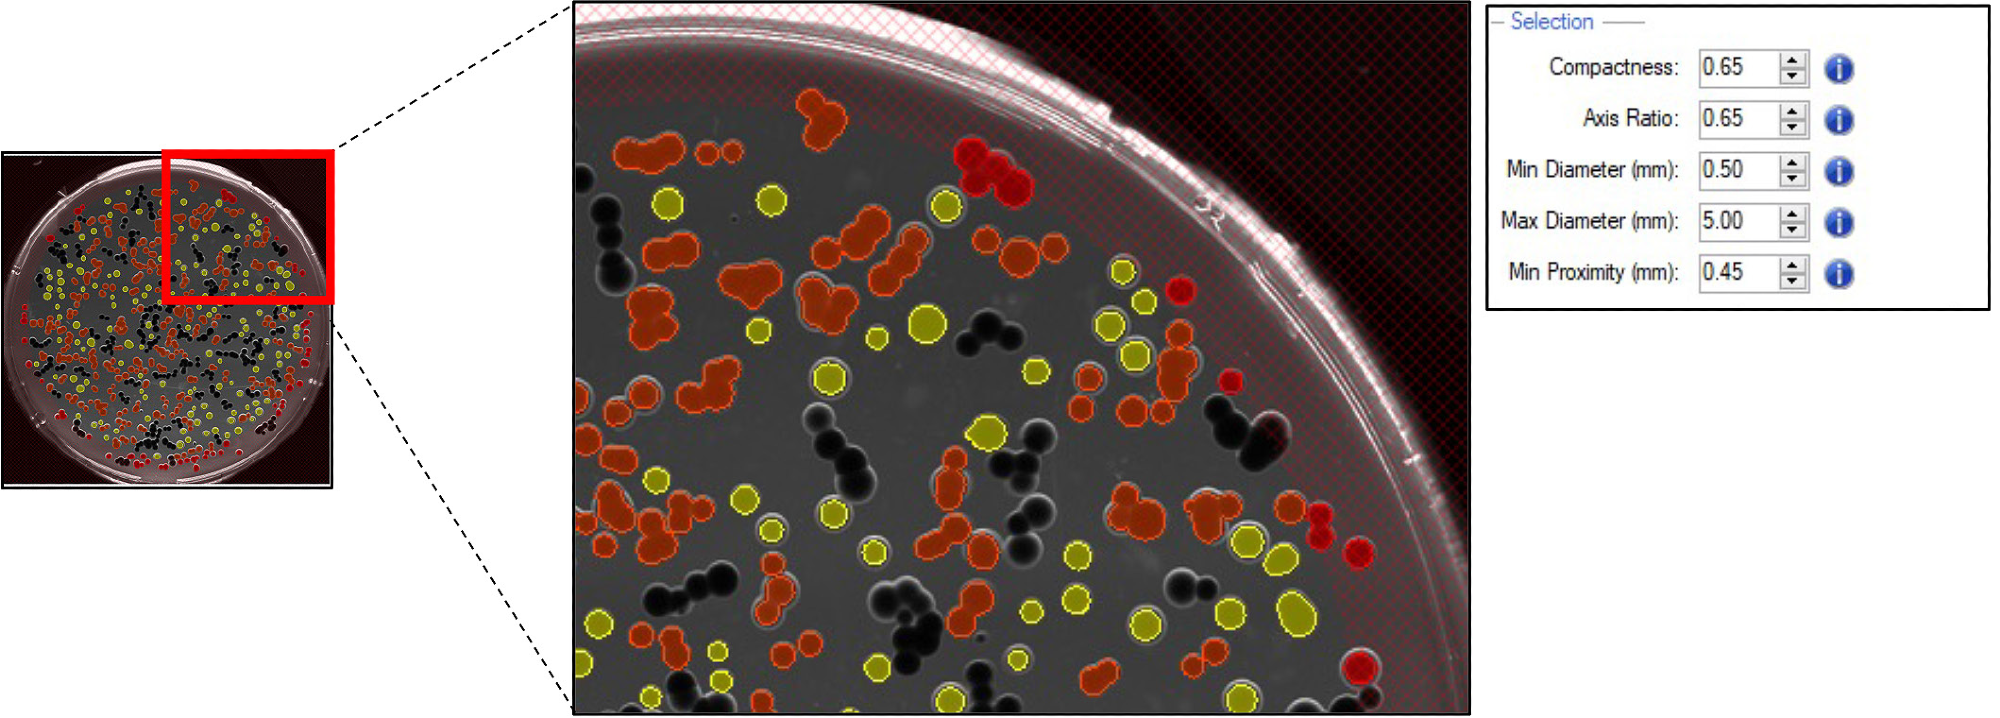 Pickable colonies are displayed in yellow. Orange: colonies excluded according to selection criteria. Top right panel: selection criteria defined for accurate colony picking